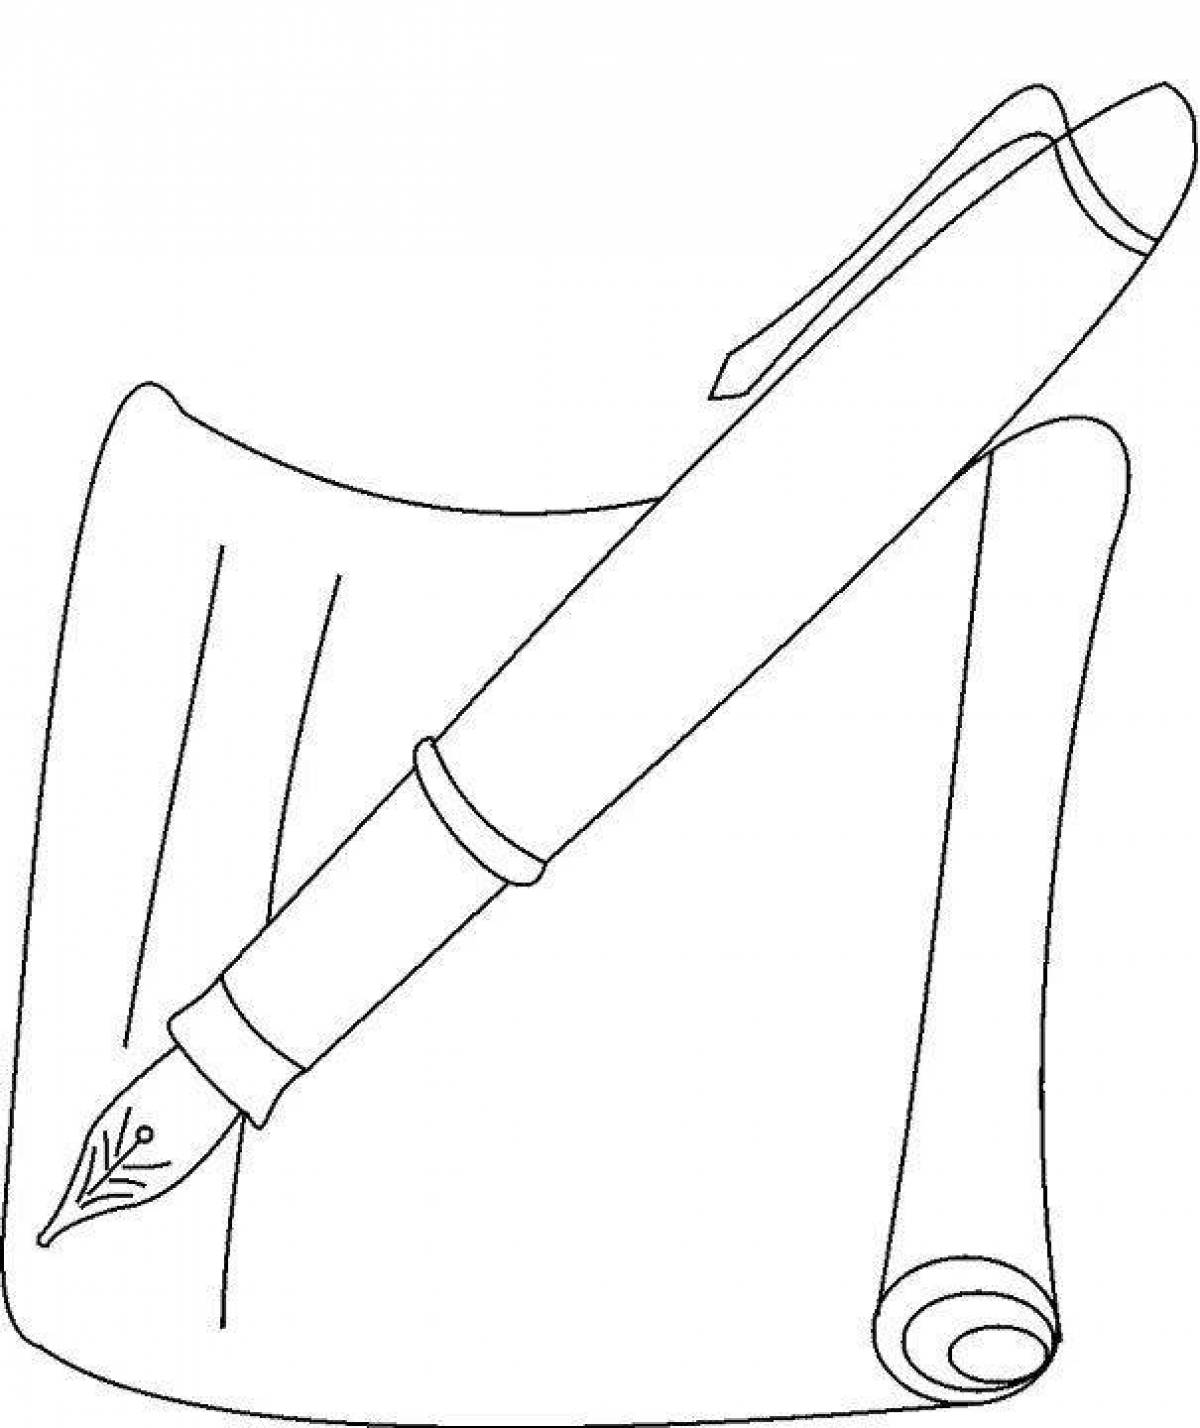 Colorful youth pen coloring page